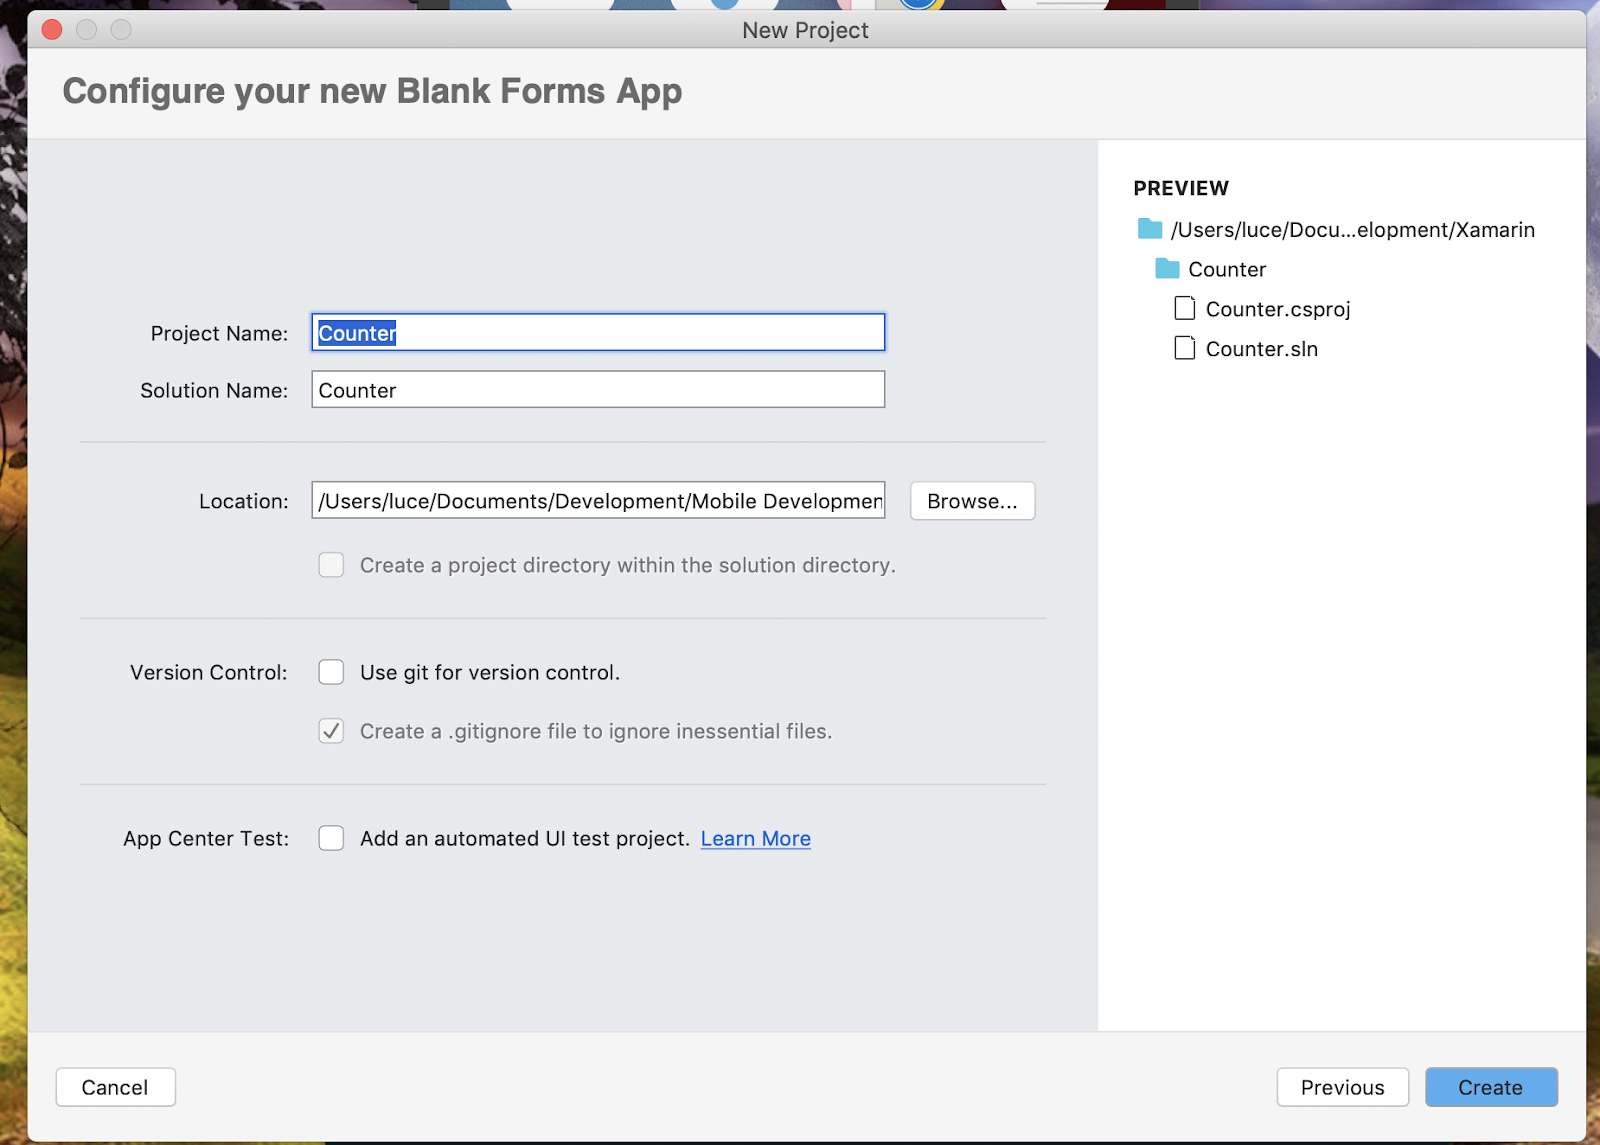 Naming your blank forms app